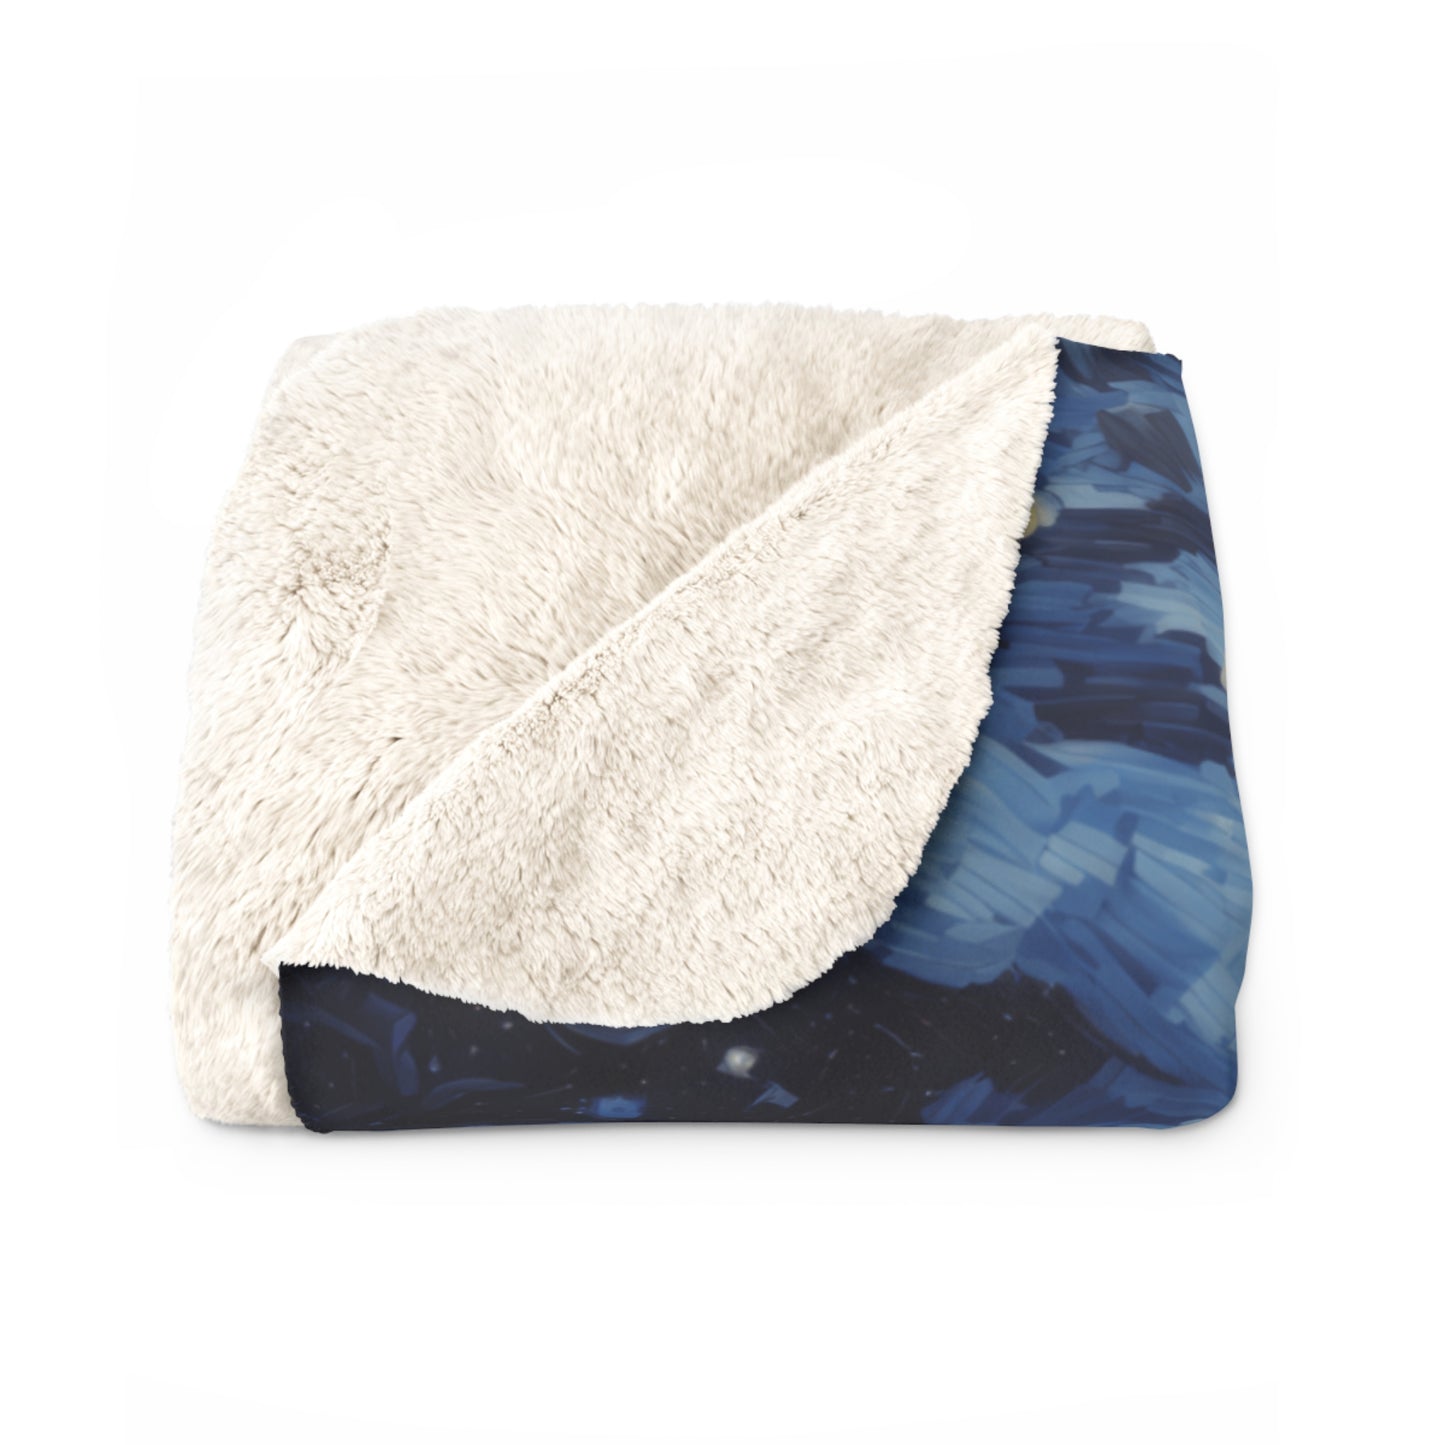 Canyonlands National Park Sherpa Blanket - The Starry Night